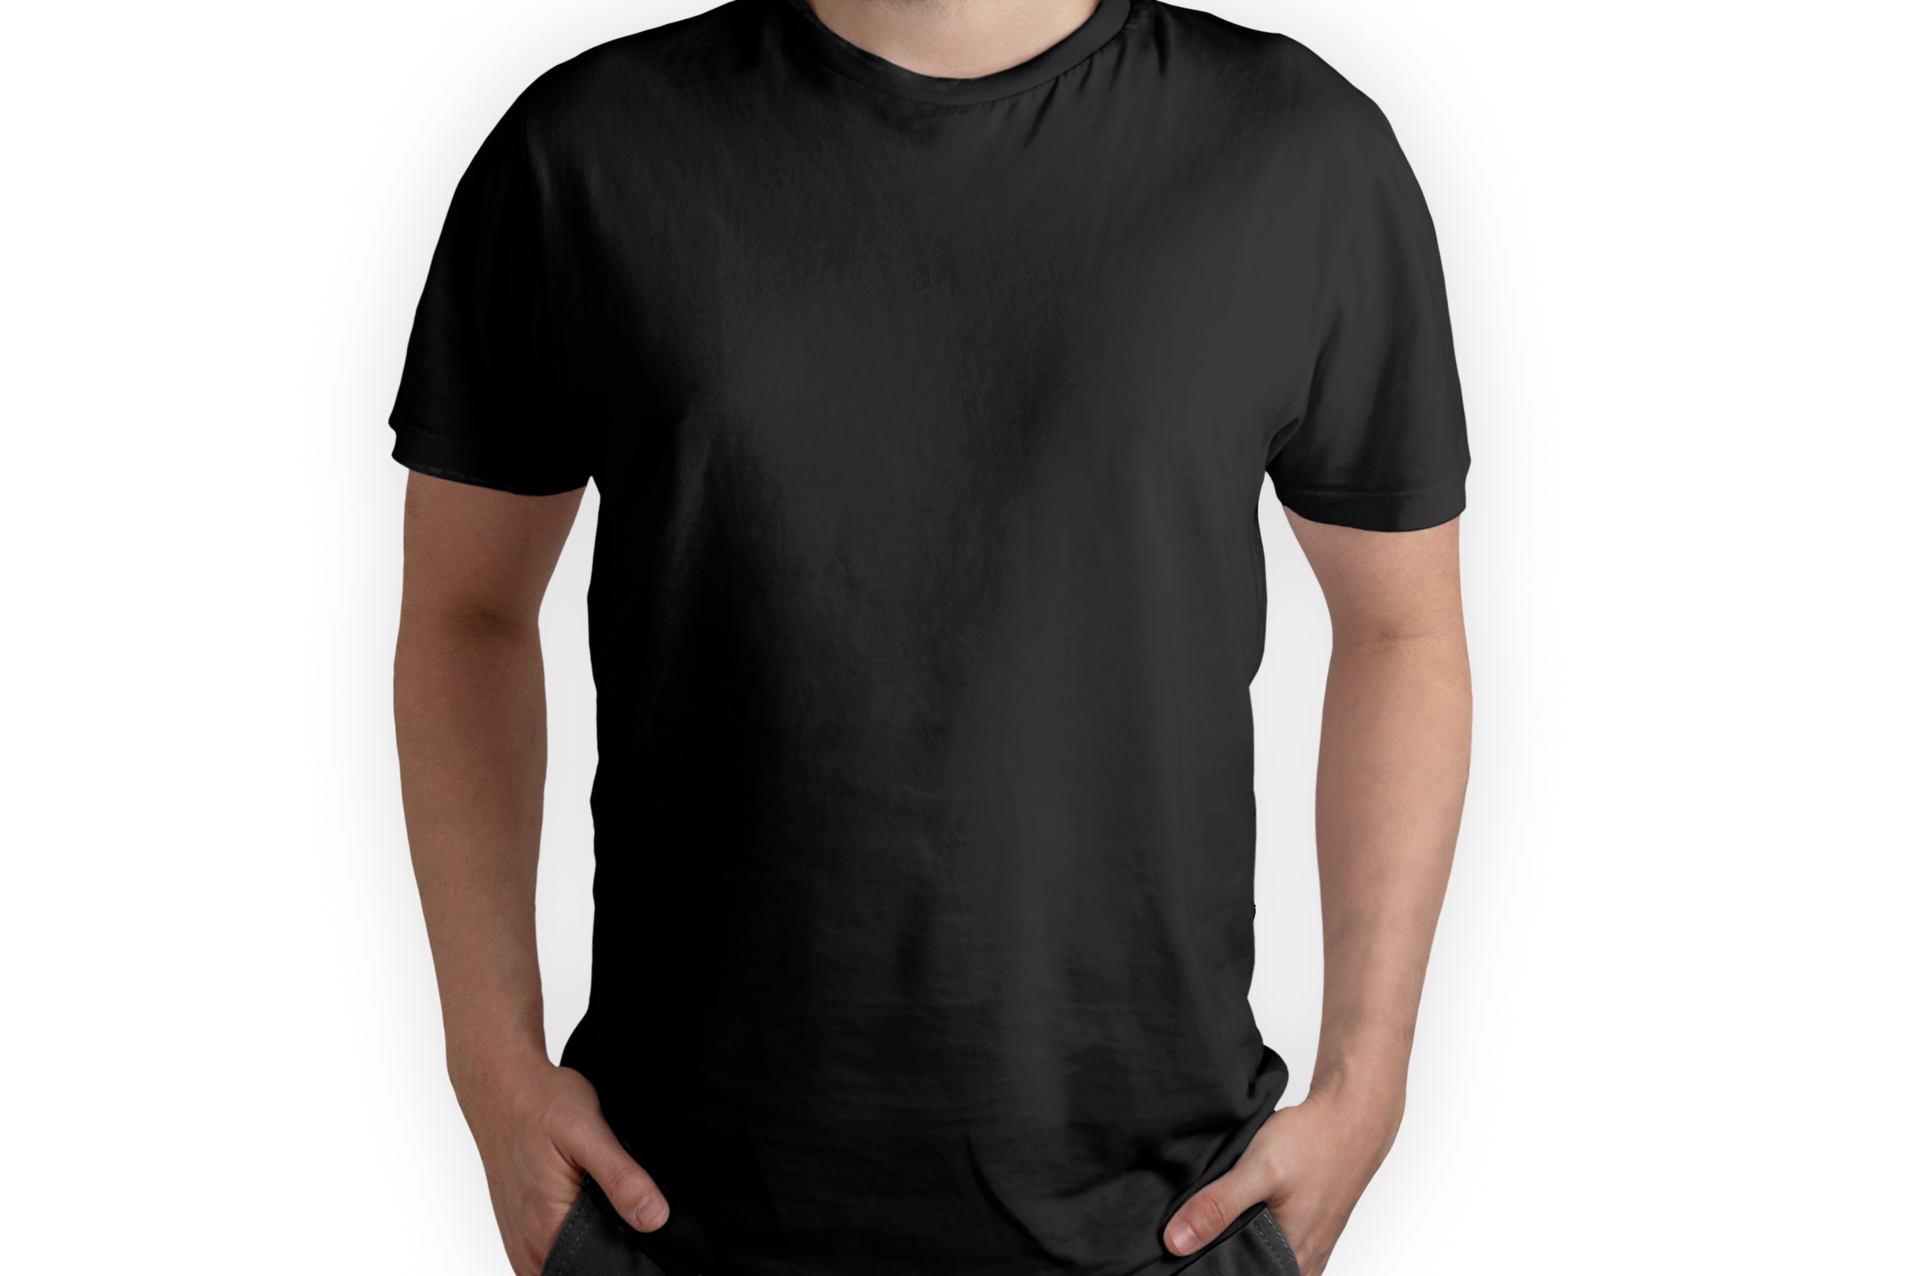 Plain T Shirt PNGs for Free Download